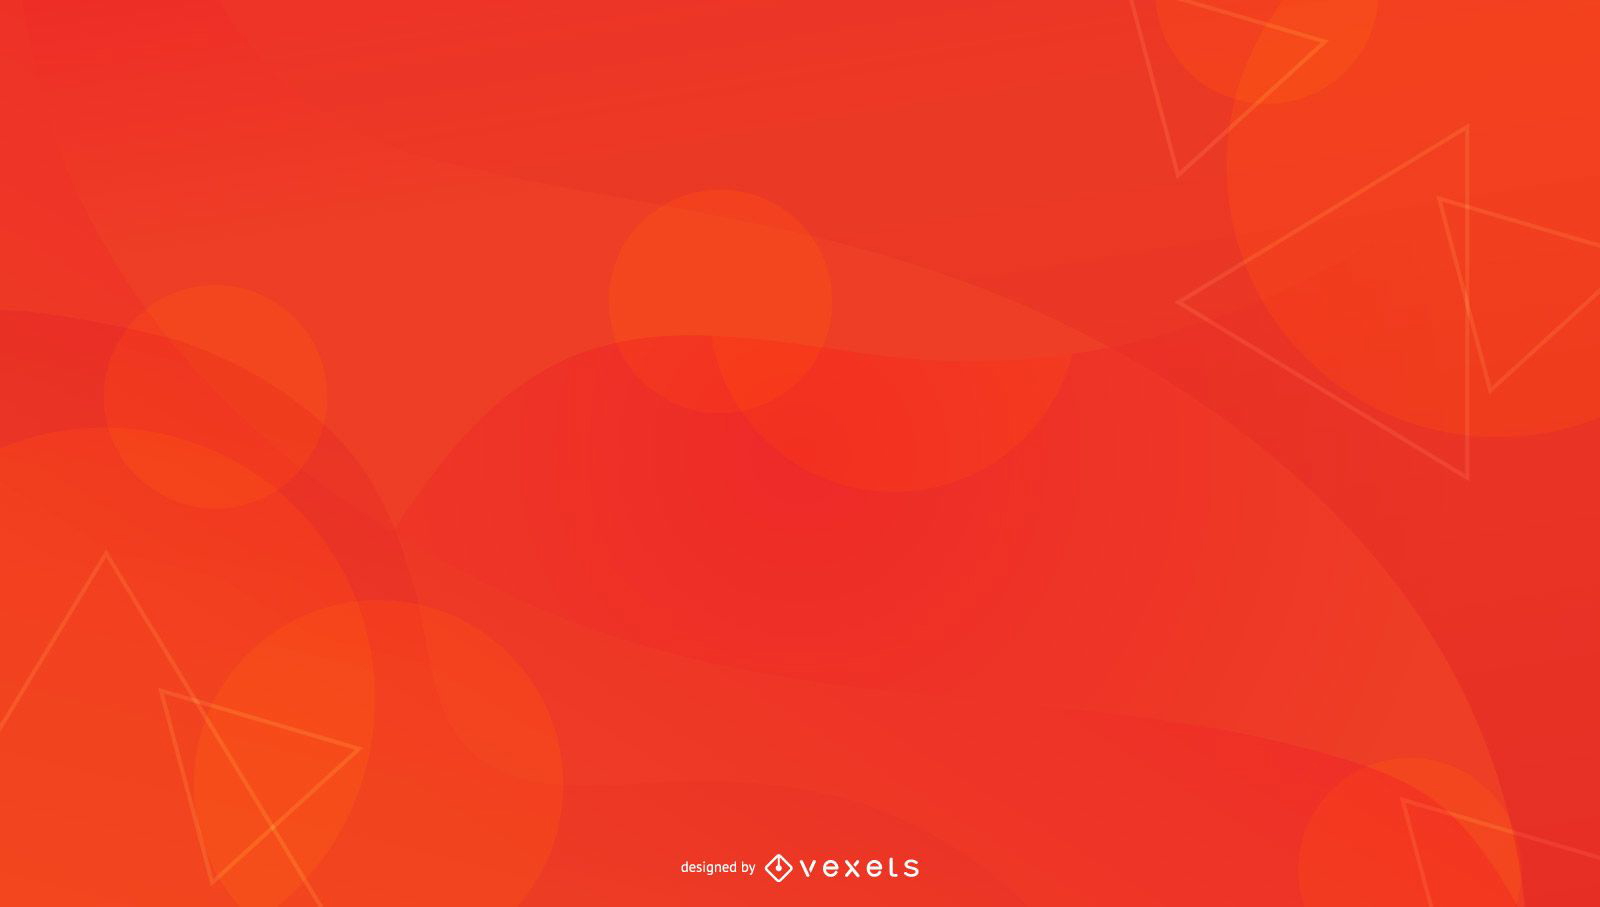 Red orange abstract background